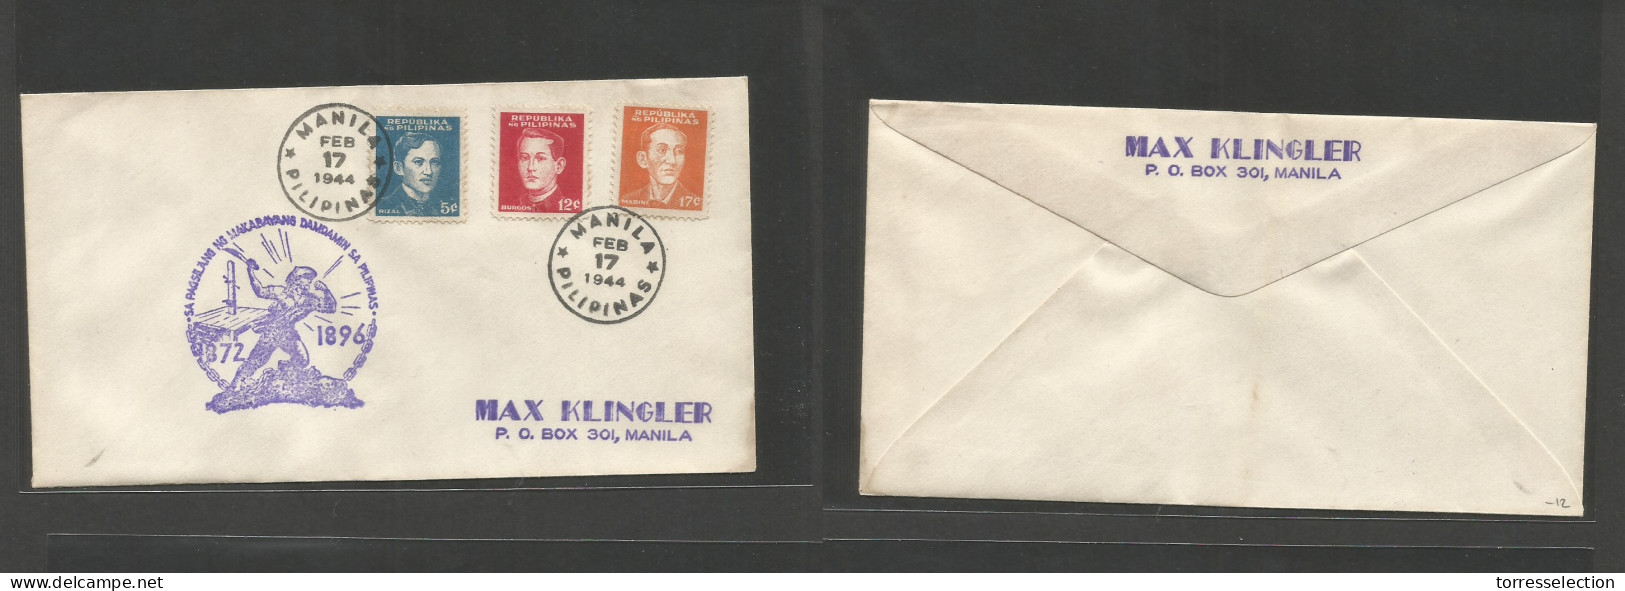 PHILIPPINES. 1944 (17 Febr) Japanese Occup. Local Printed Usage. Special Cachet. Multifkd Env. SALE. - Philippines